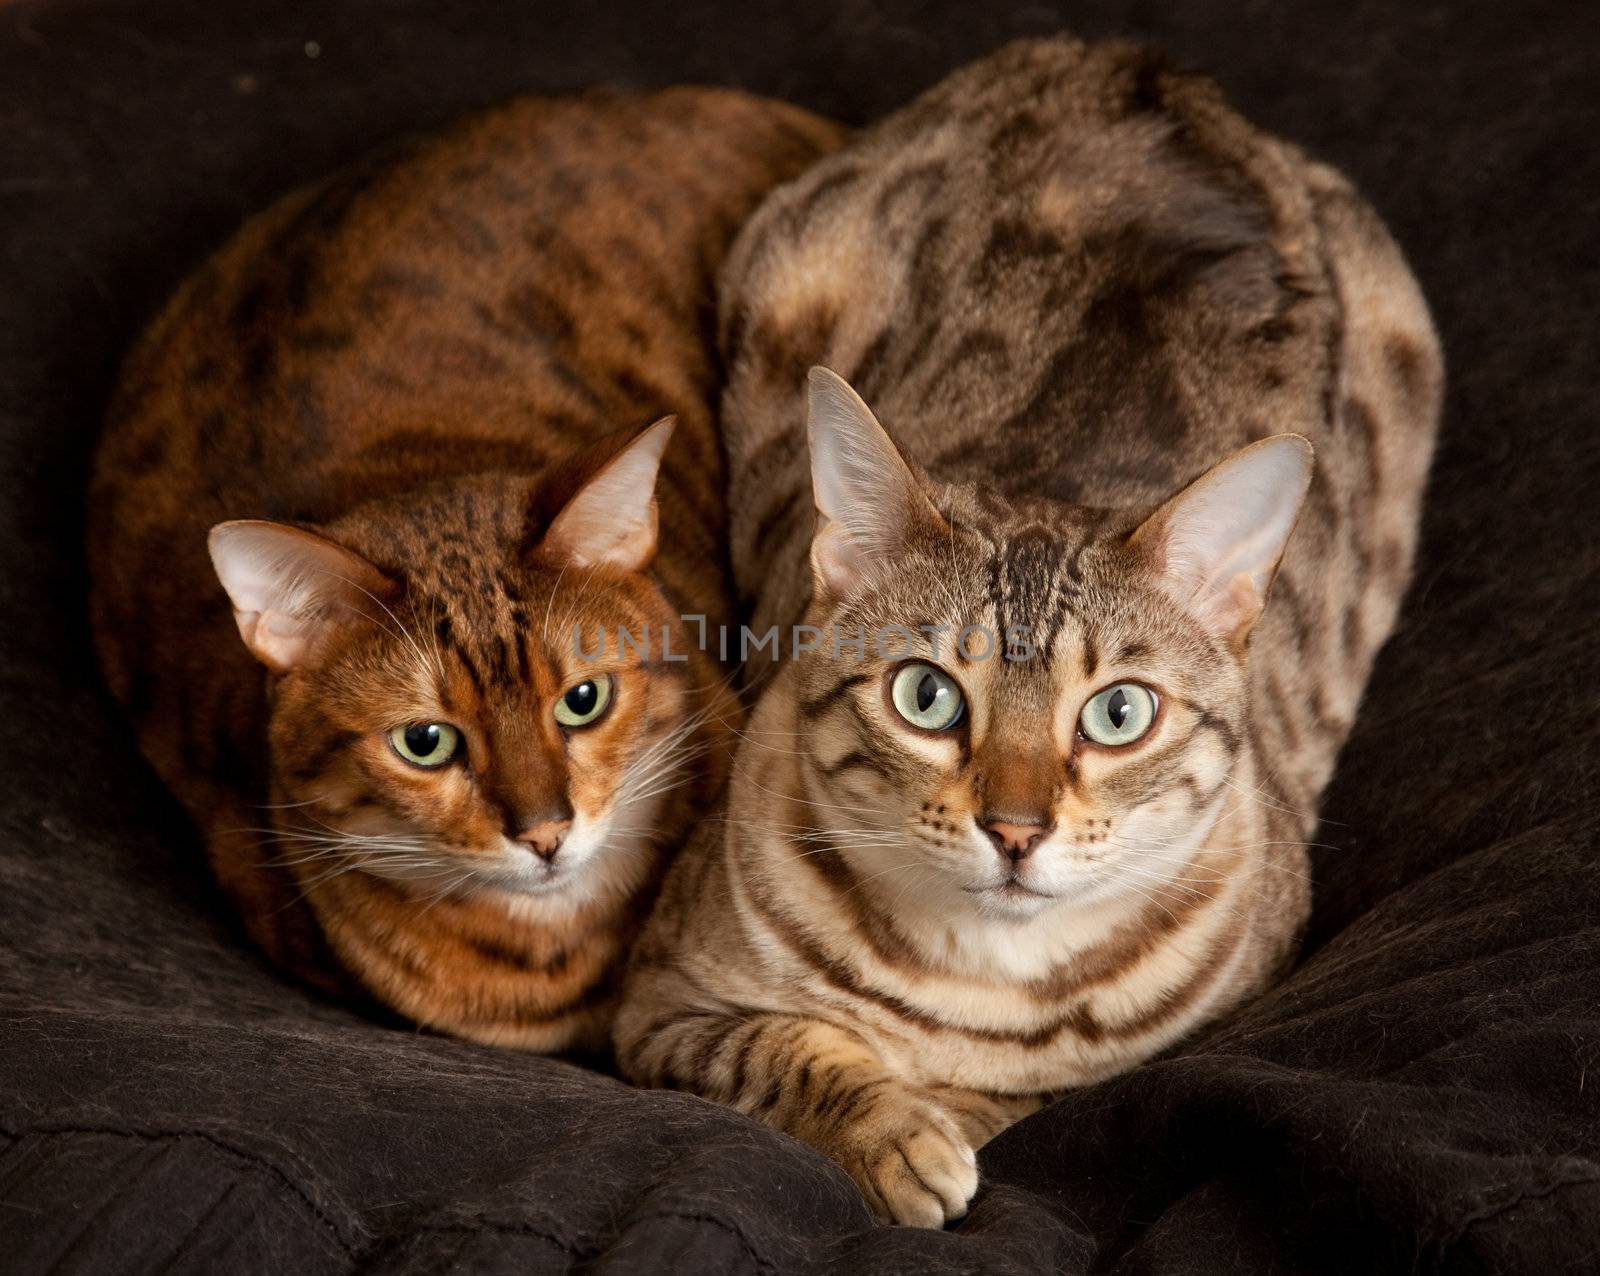 Lovely pair of bengal cats staring straight at the camera from their seat